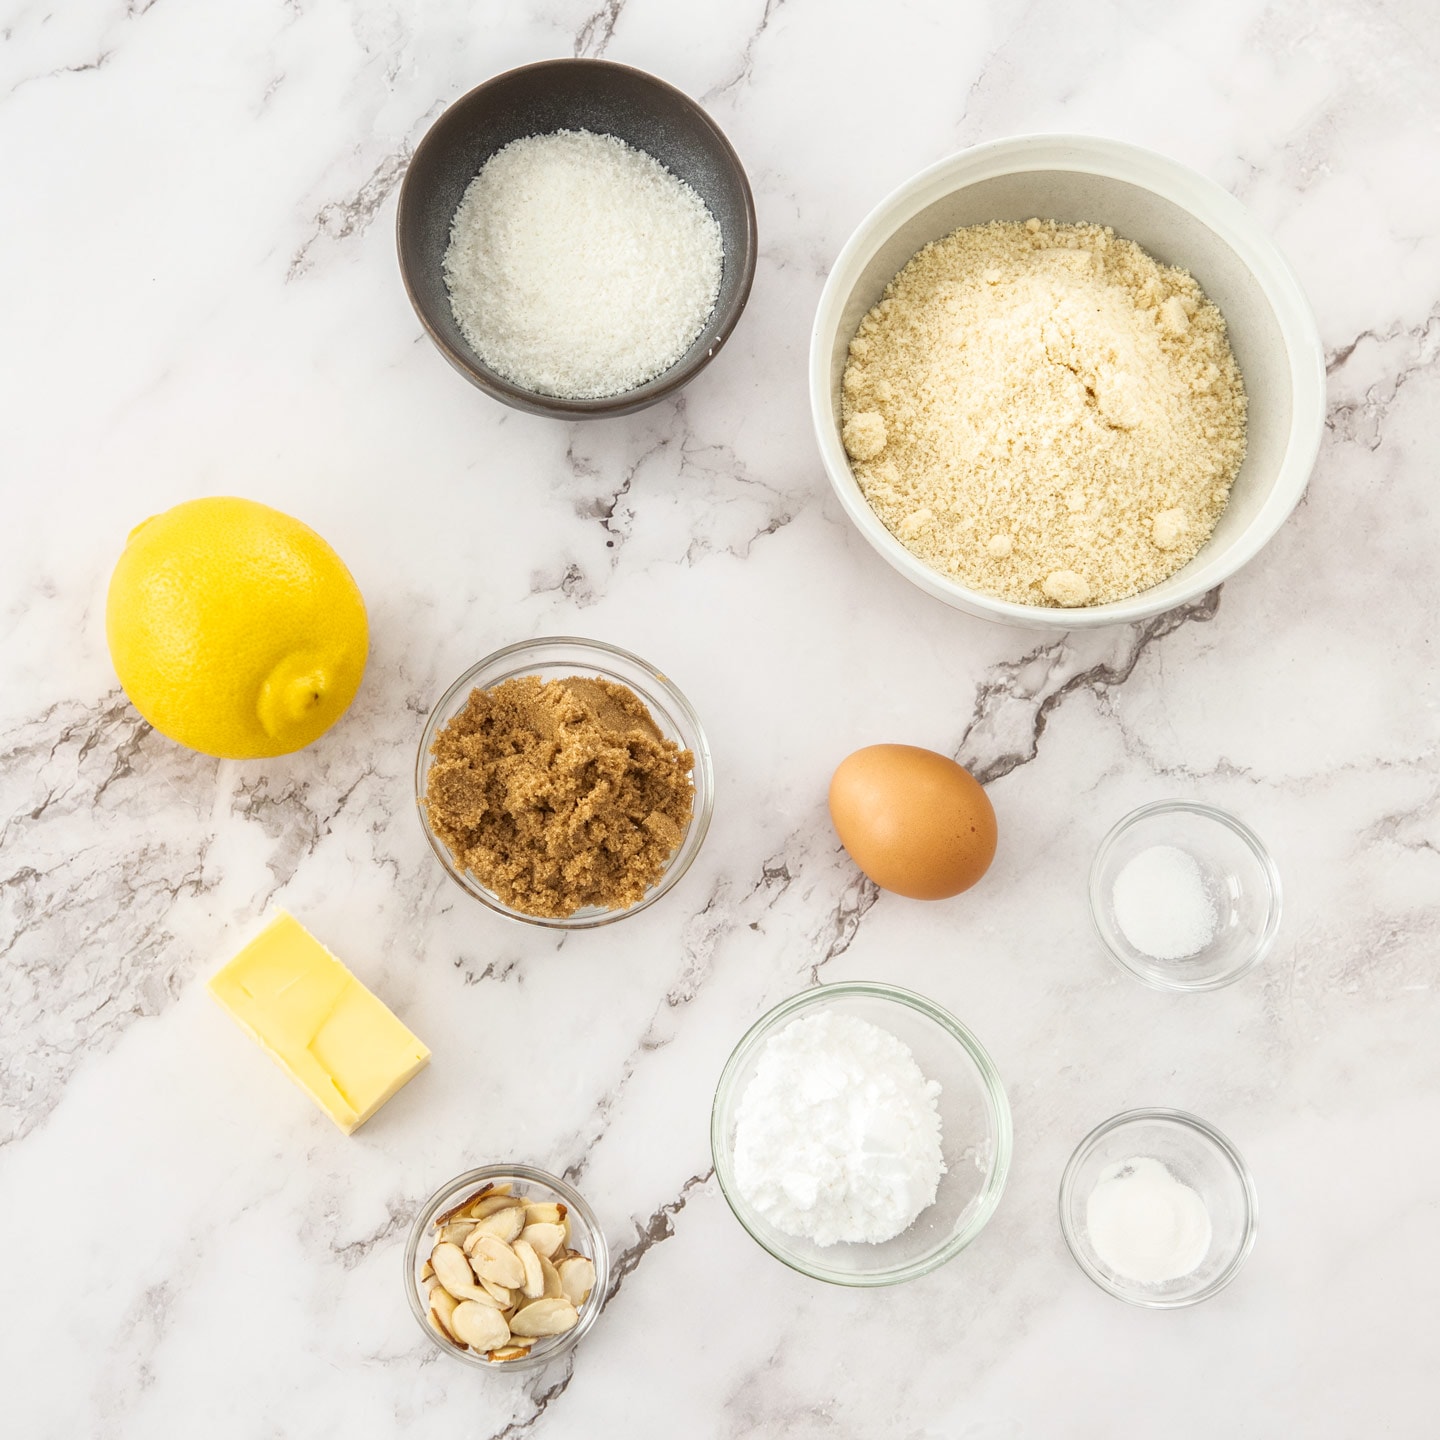 Ingredients for almond coconut cookies on a marble surface.